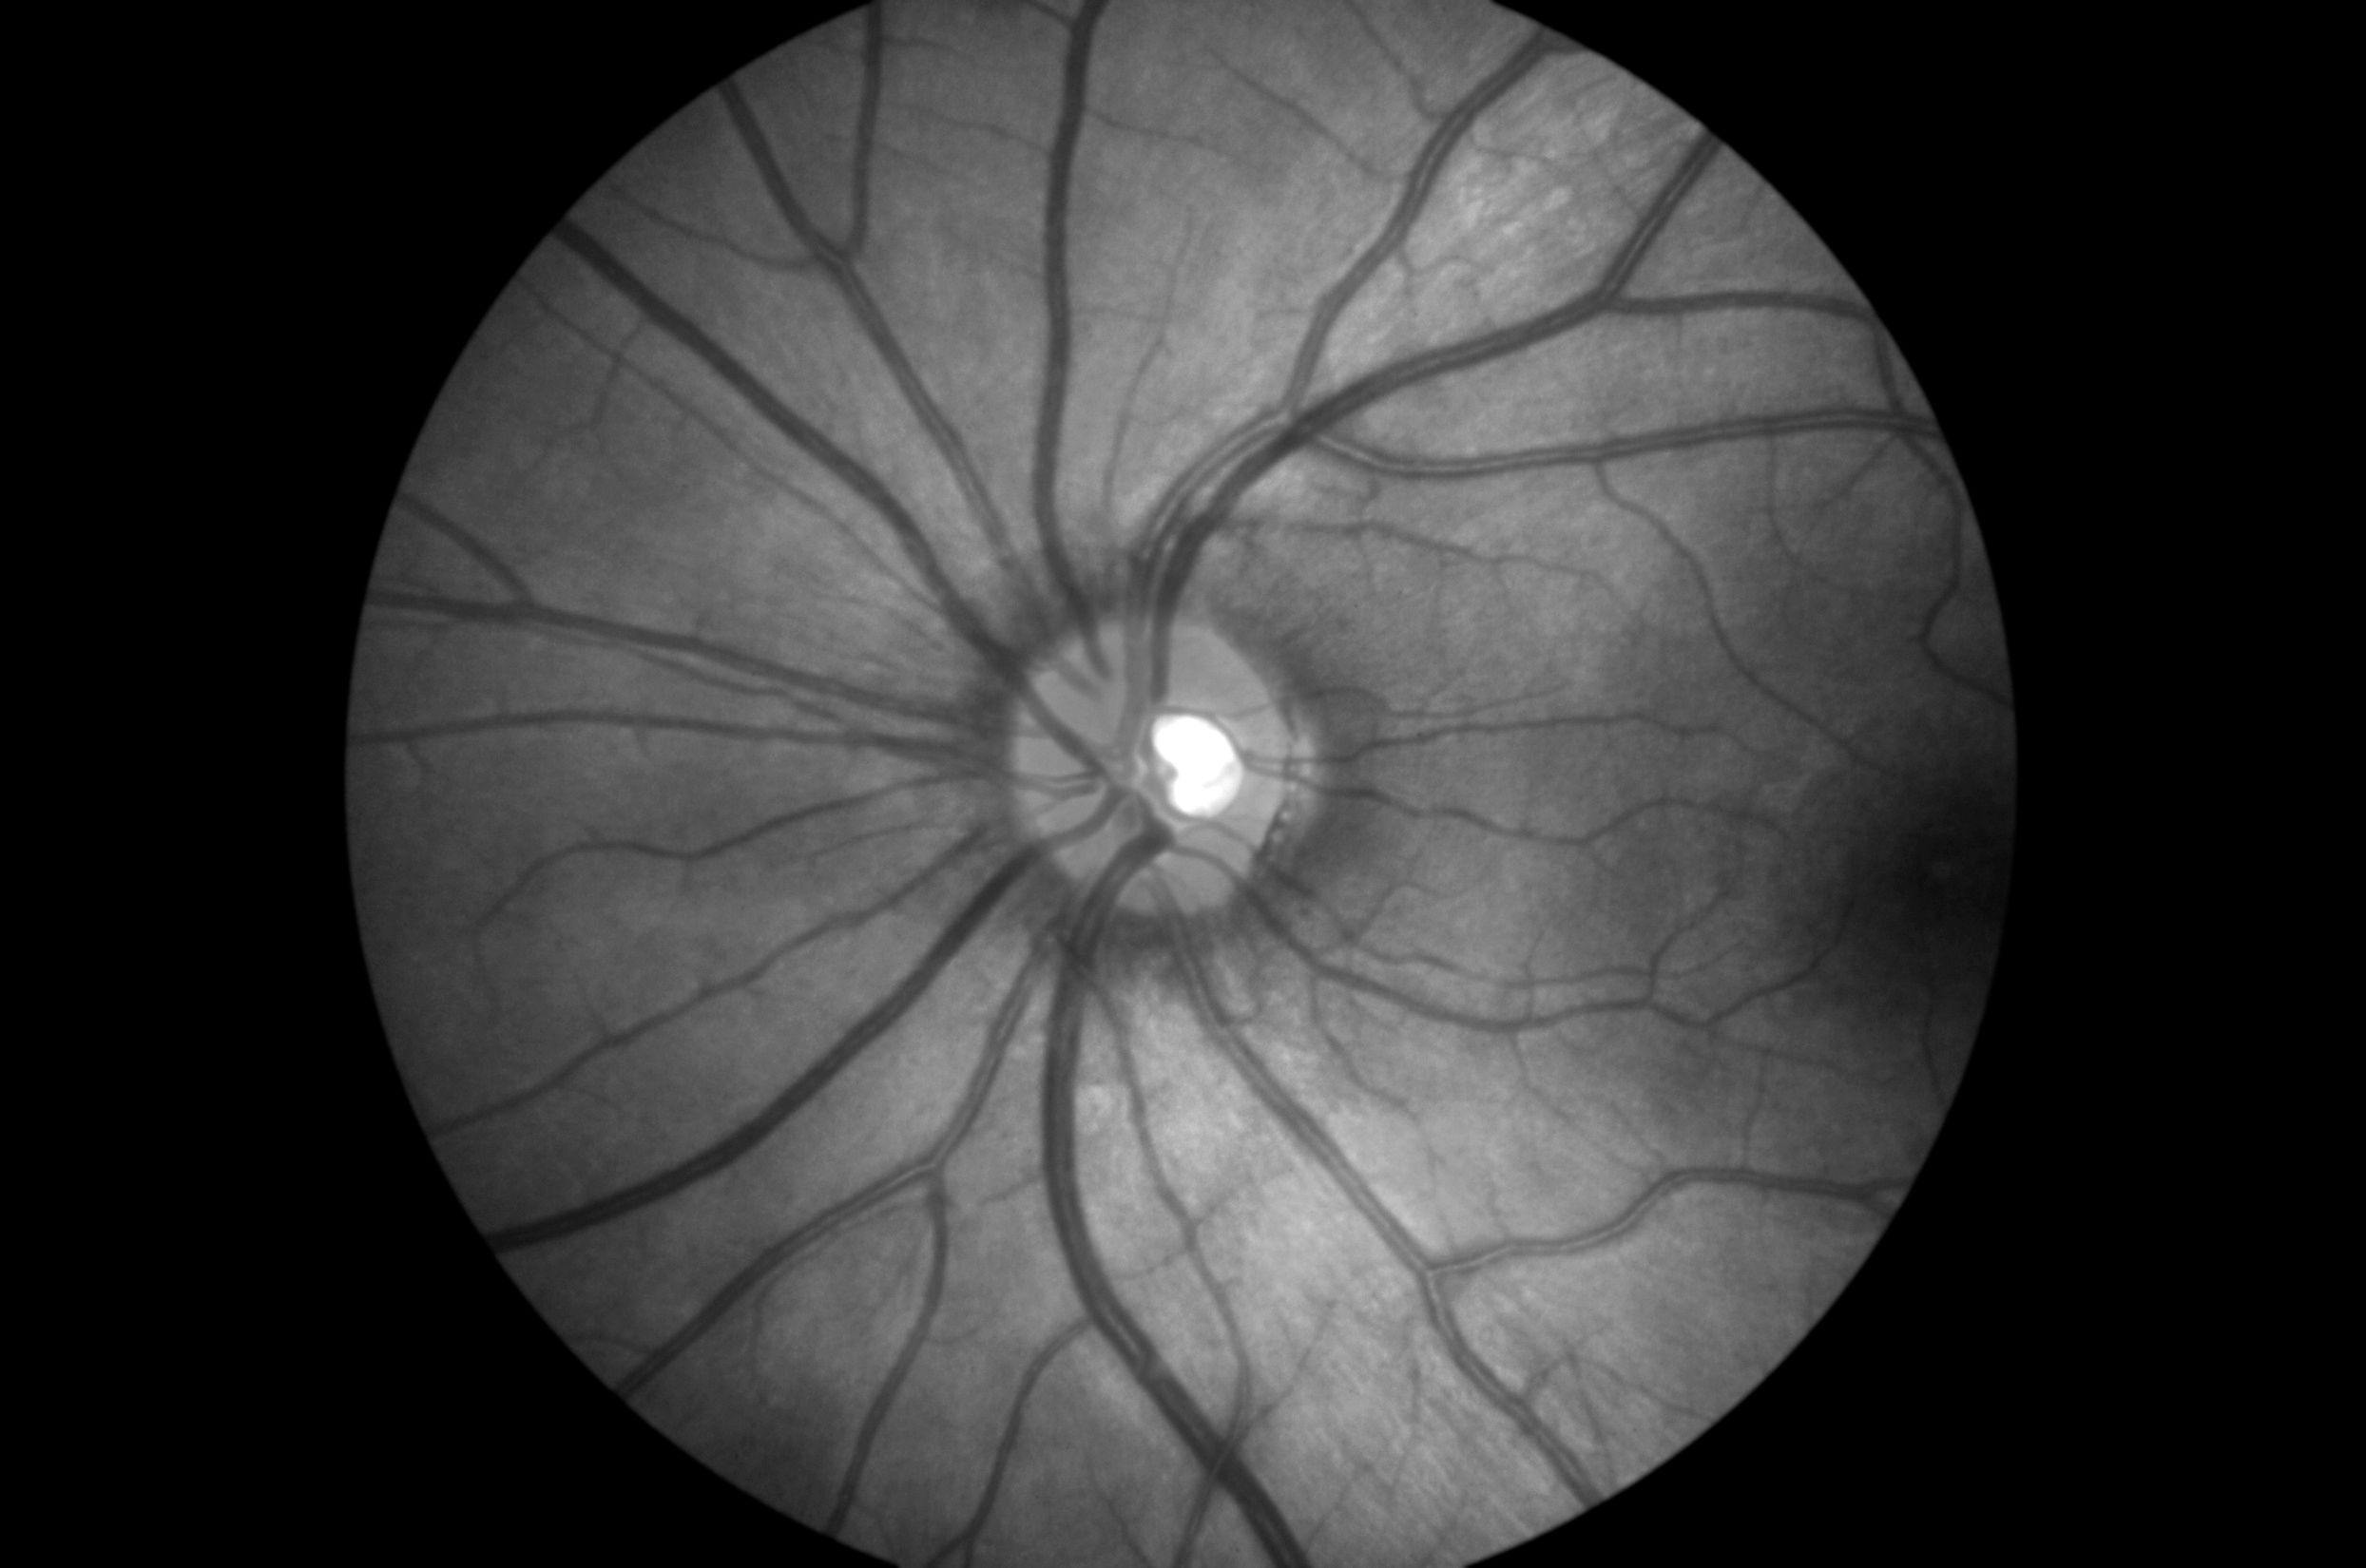 Retinal pathologies challenging to image with current technologies 